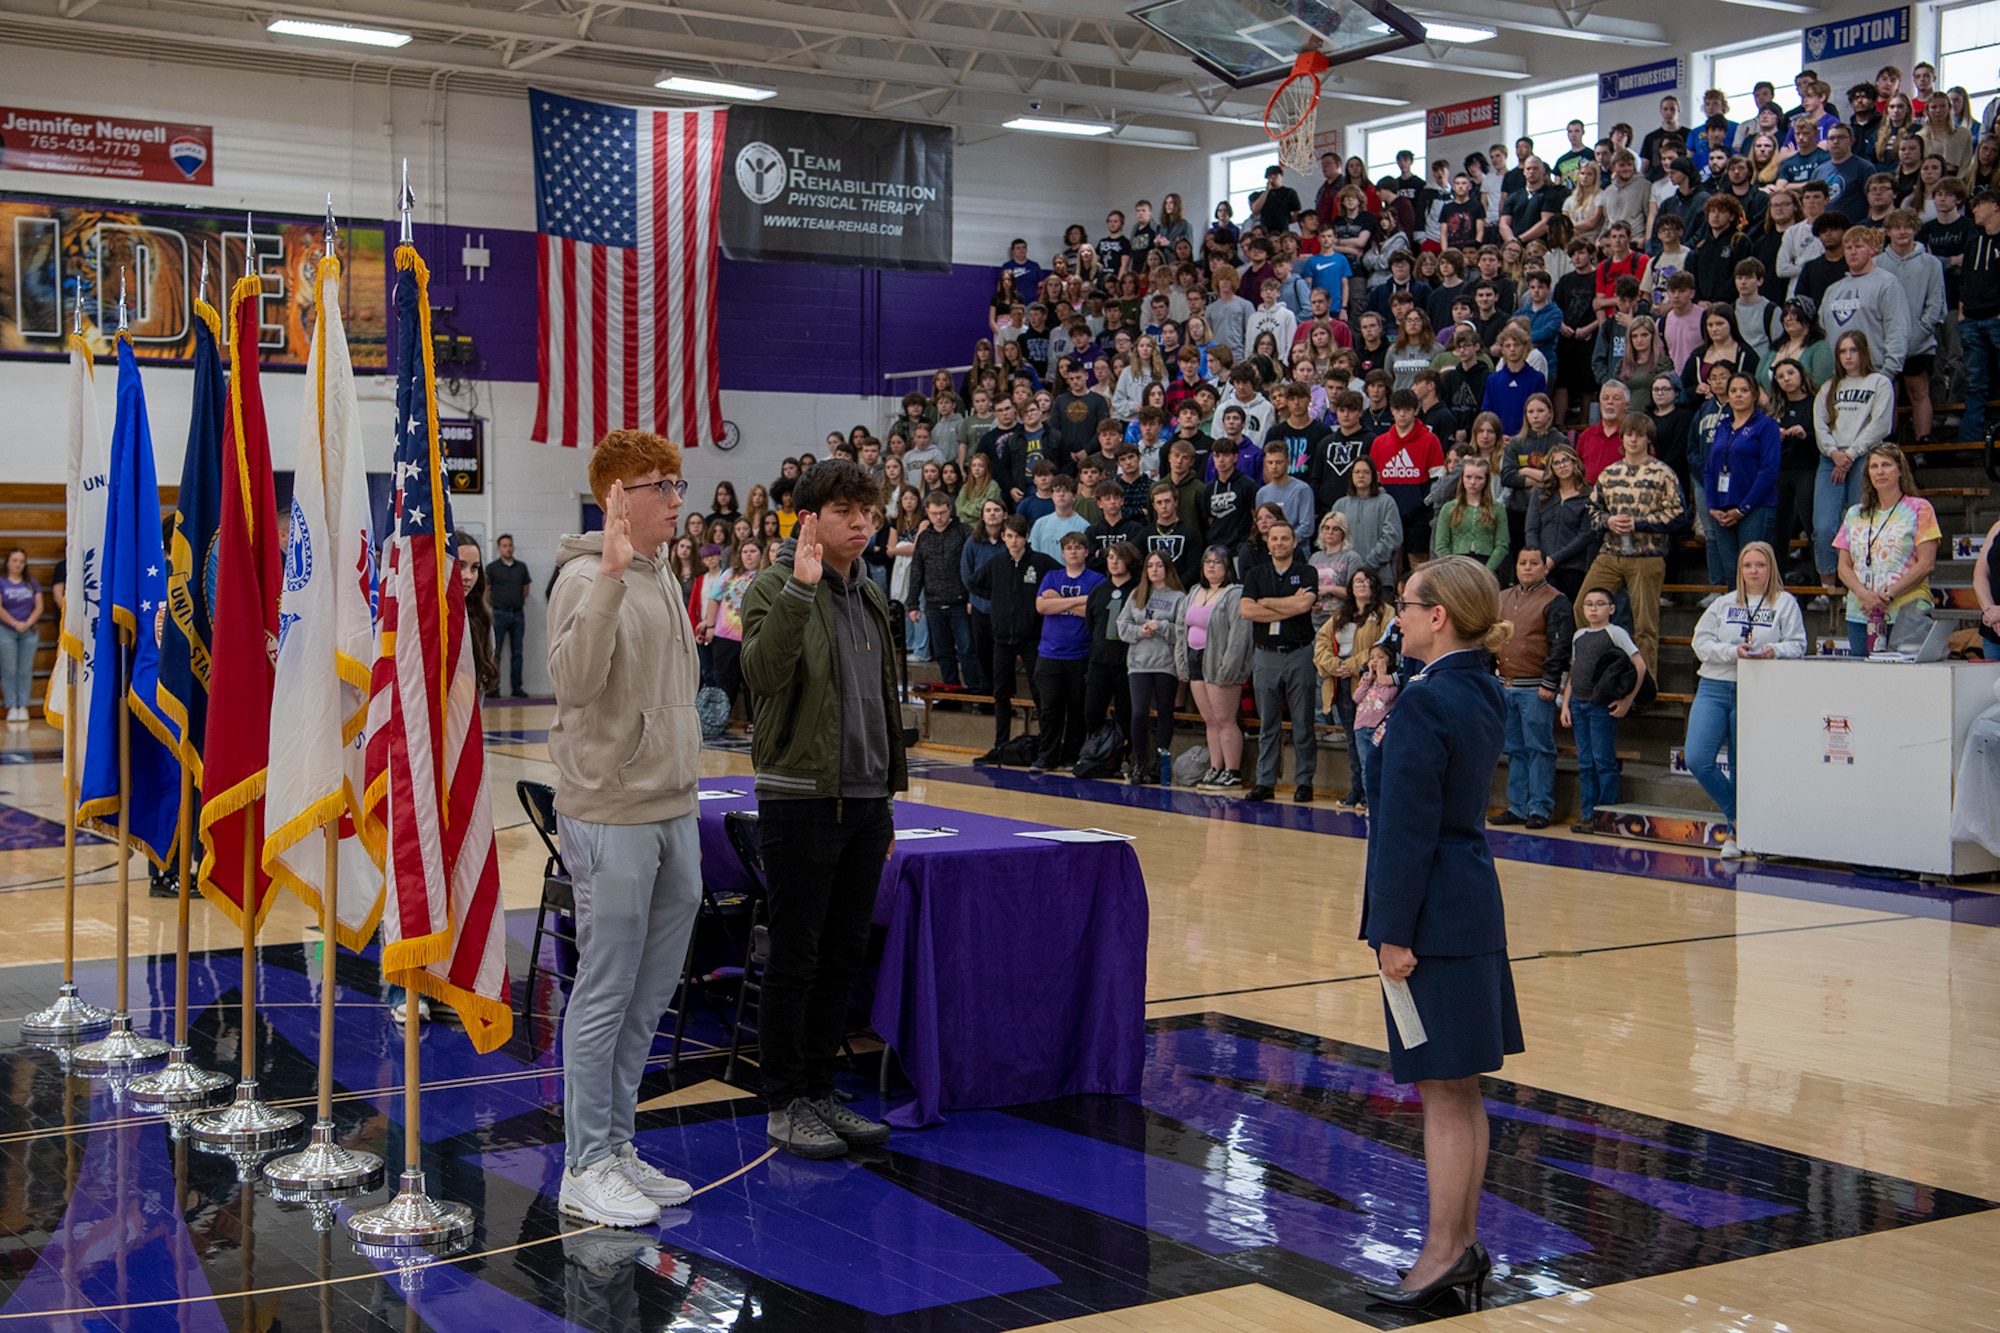 Col. Arianne Mayberry, 434th Maintenance Group commander, administers the oath of enlistment to Northwestern High School Students who decided to join the military. Schools from both Peru and Kokomo held events to recognize the next generation of citizen warriors. (U.S. Air Force photo/TSgt. Jami Lancette)